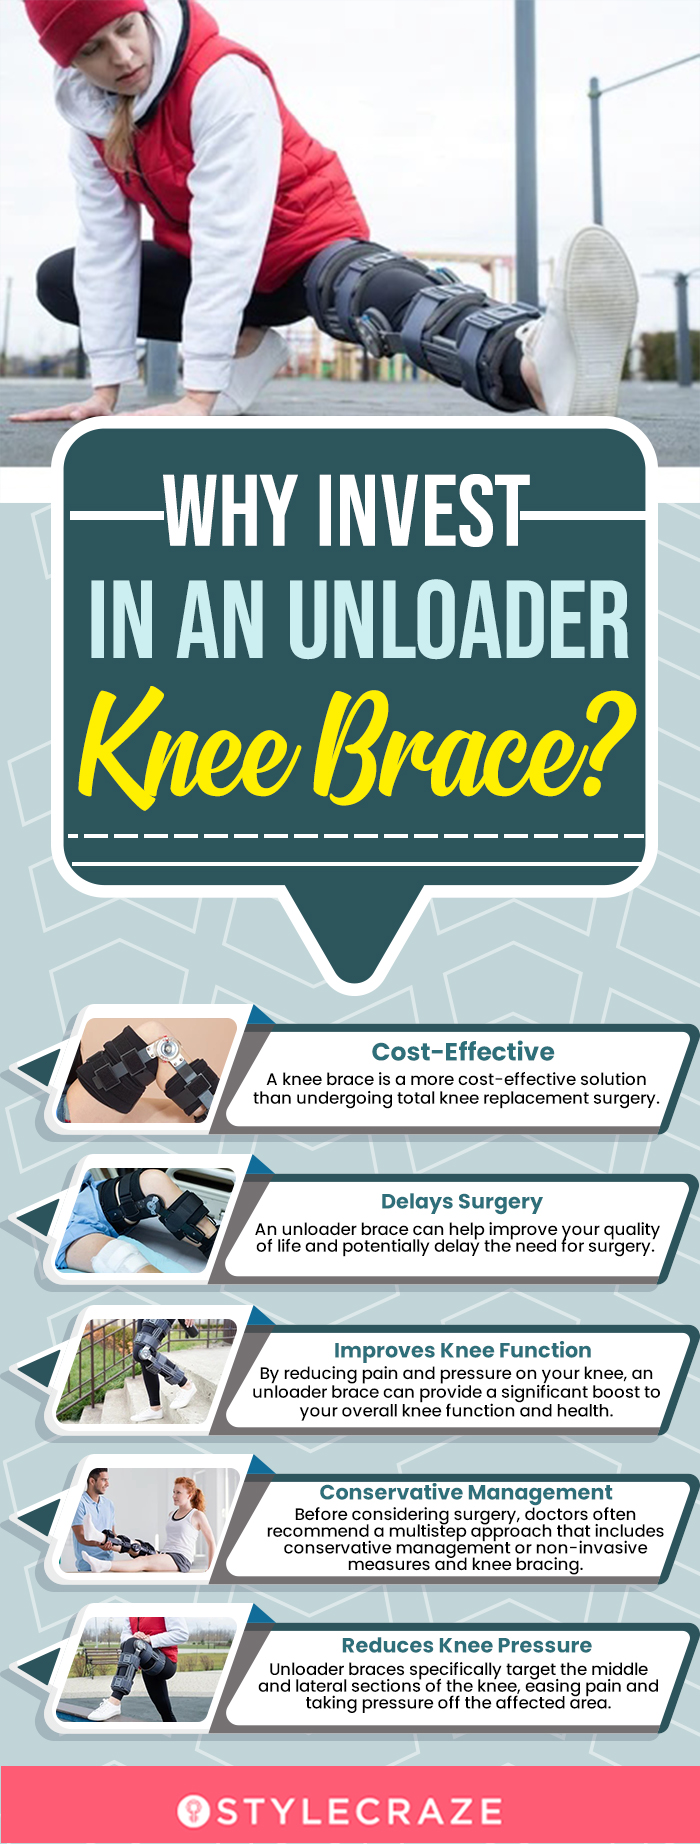 Why Invest In An Unloader Knee Brace? (infographic)